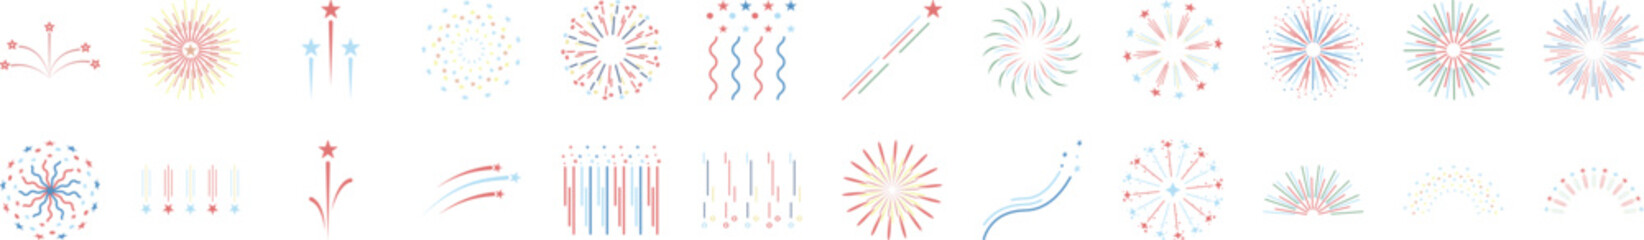 Fireworks cartoon icons collection vector illustration design